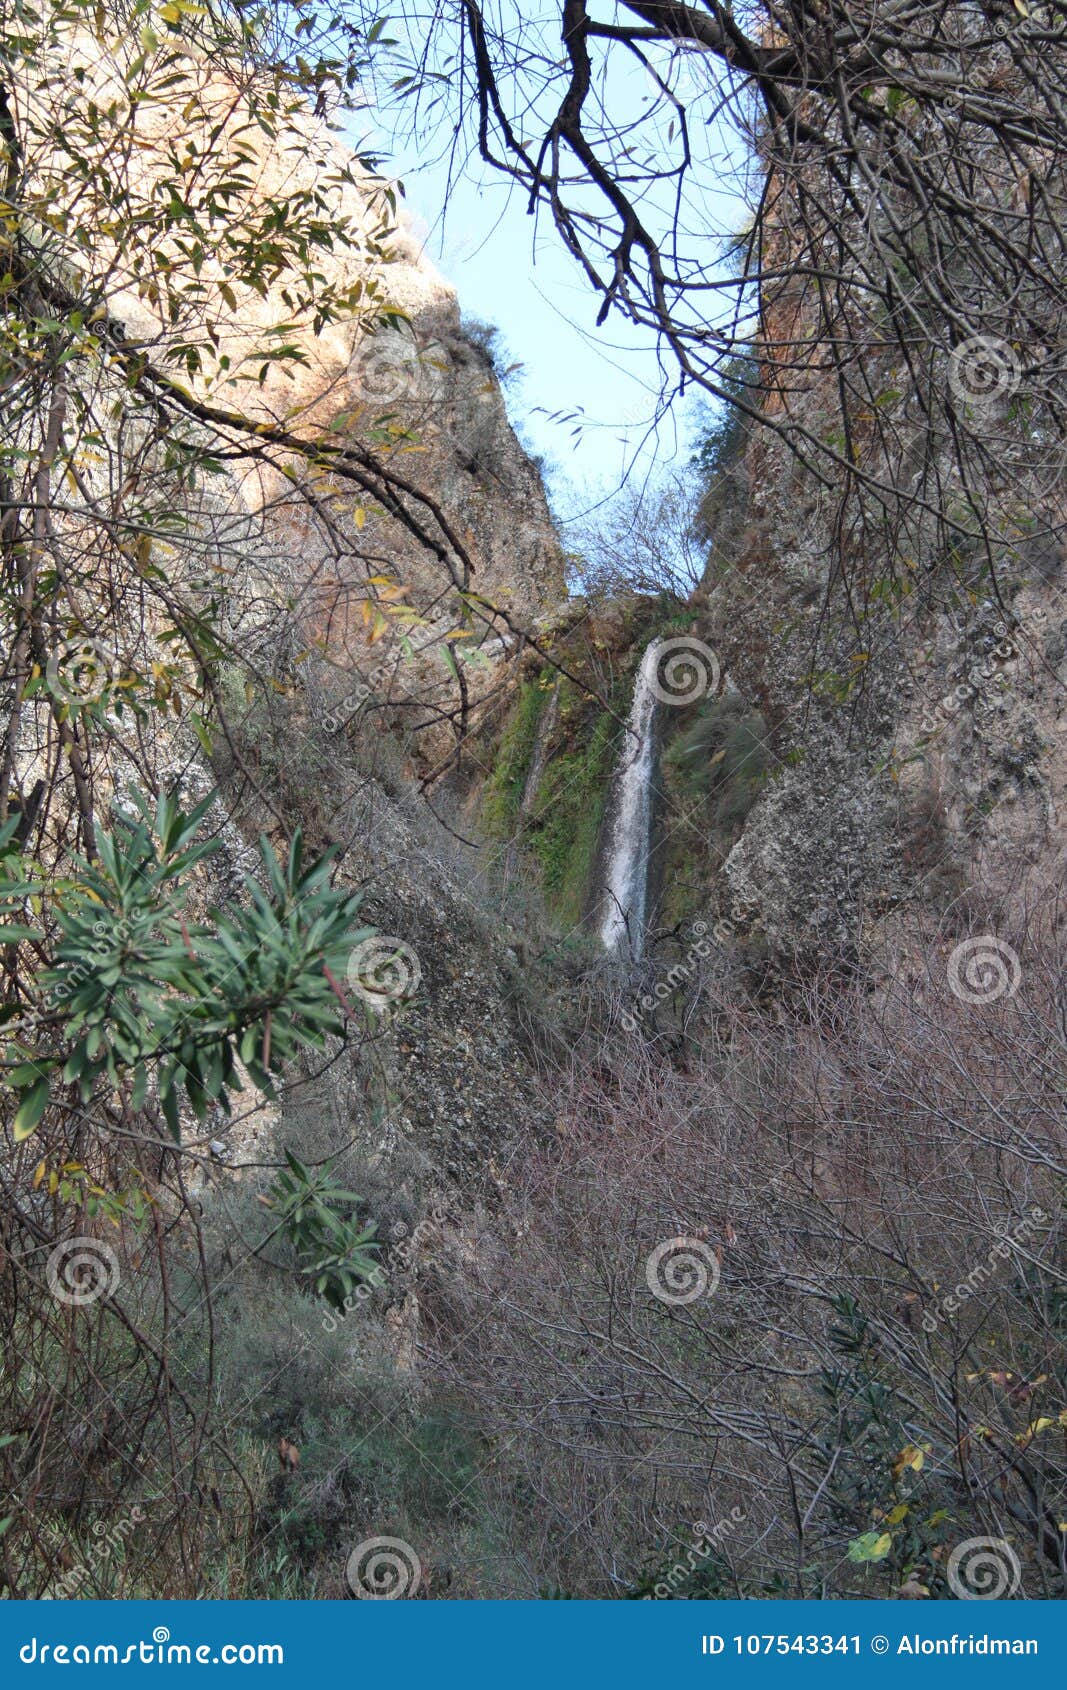  Tanur  Waterfall stock image Image of landscape tour 